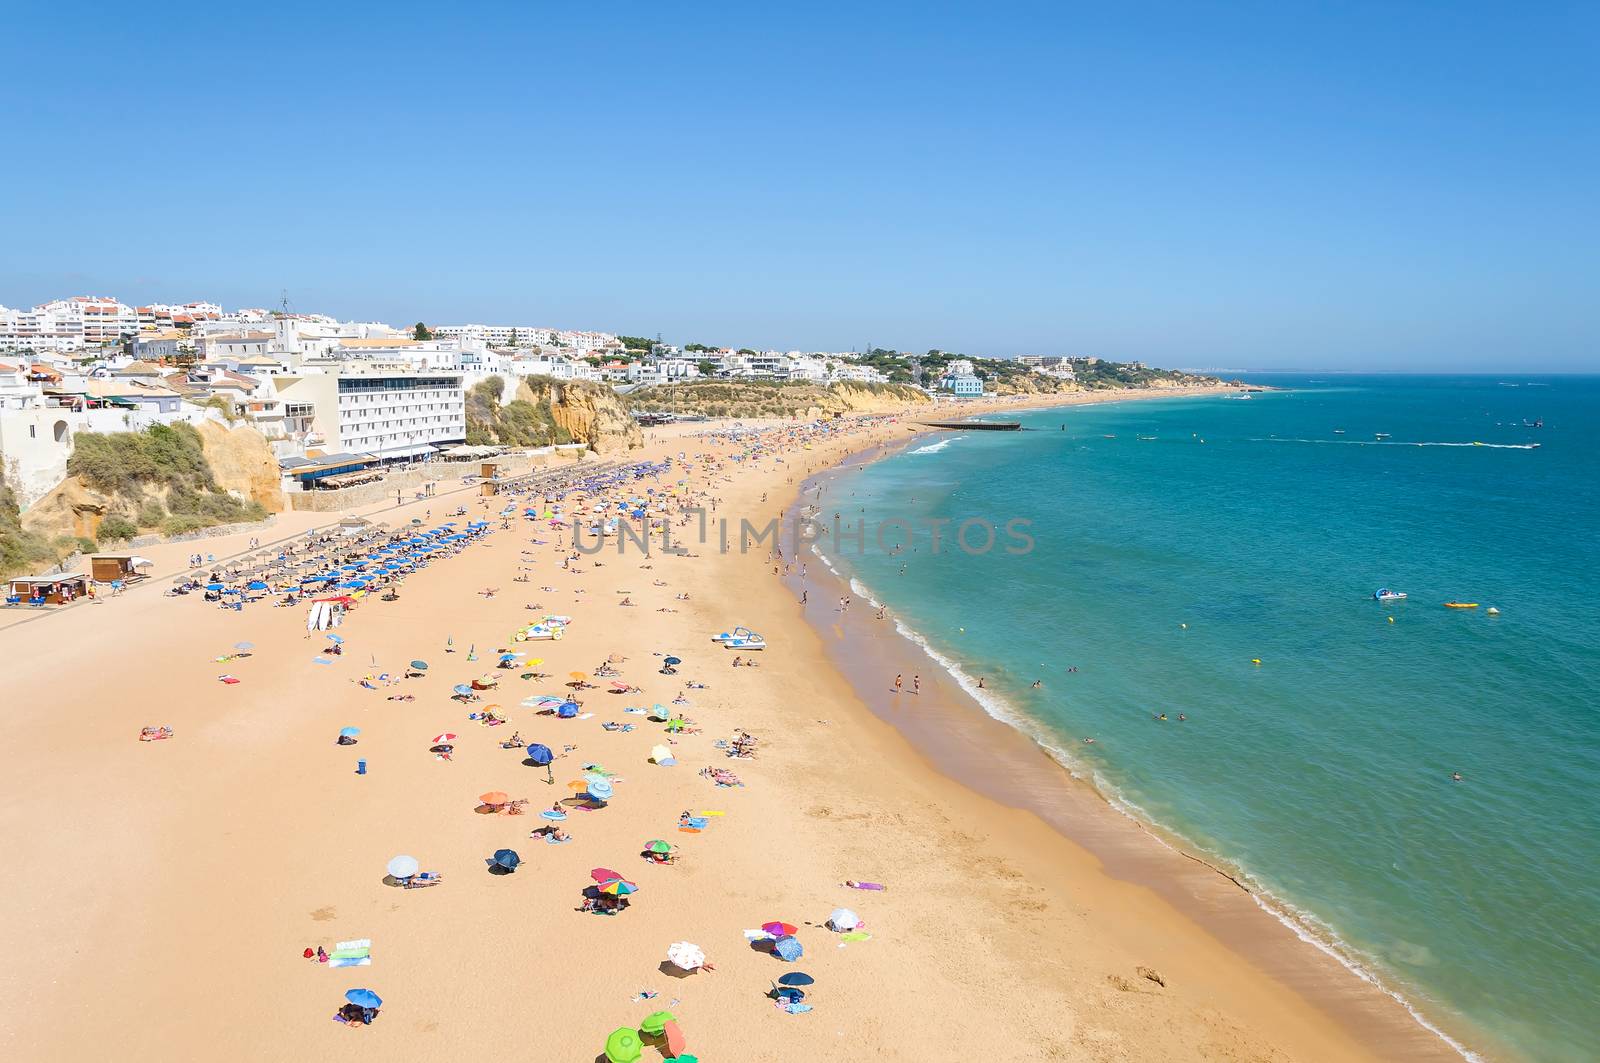 View of crowded beach in Albufeira, Algarve, Portugal